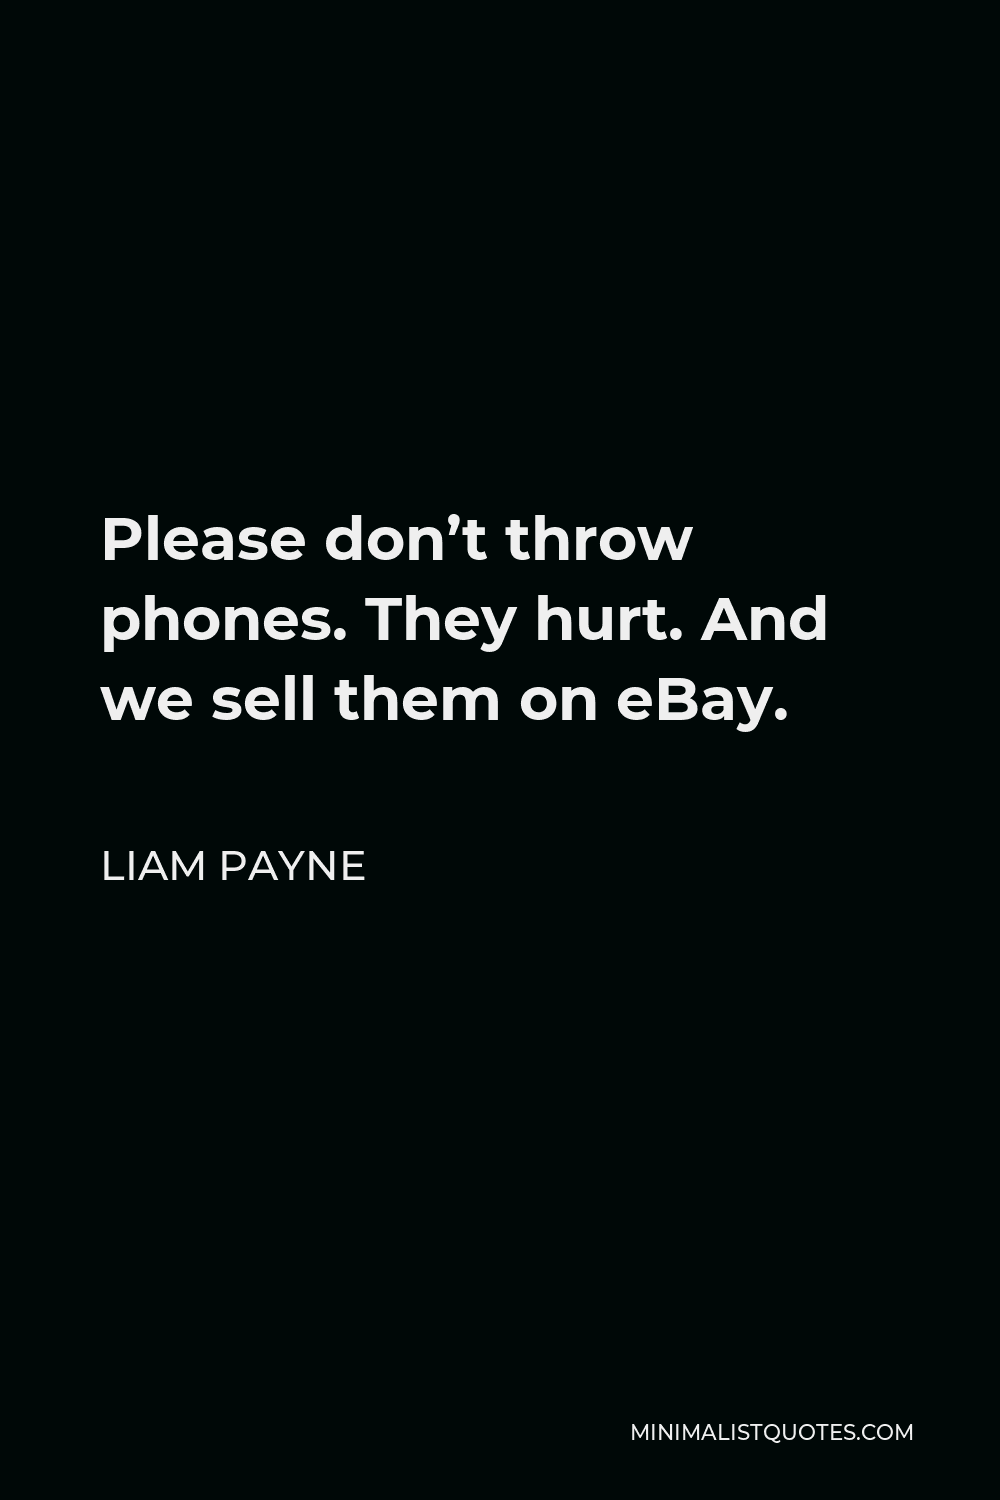 Liam Payne Quote - Please don’t throw phones. They hurt. And we sell them on eBay.